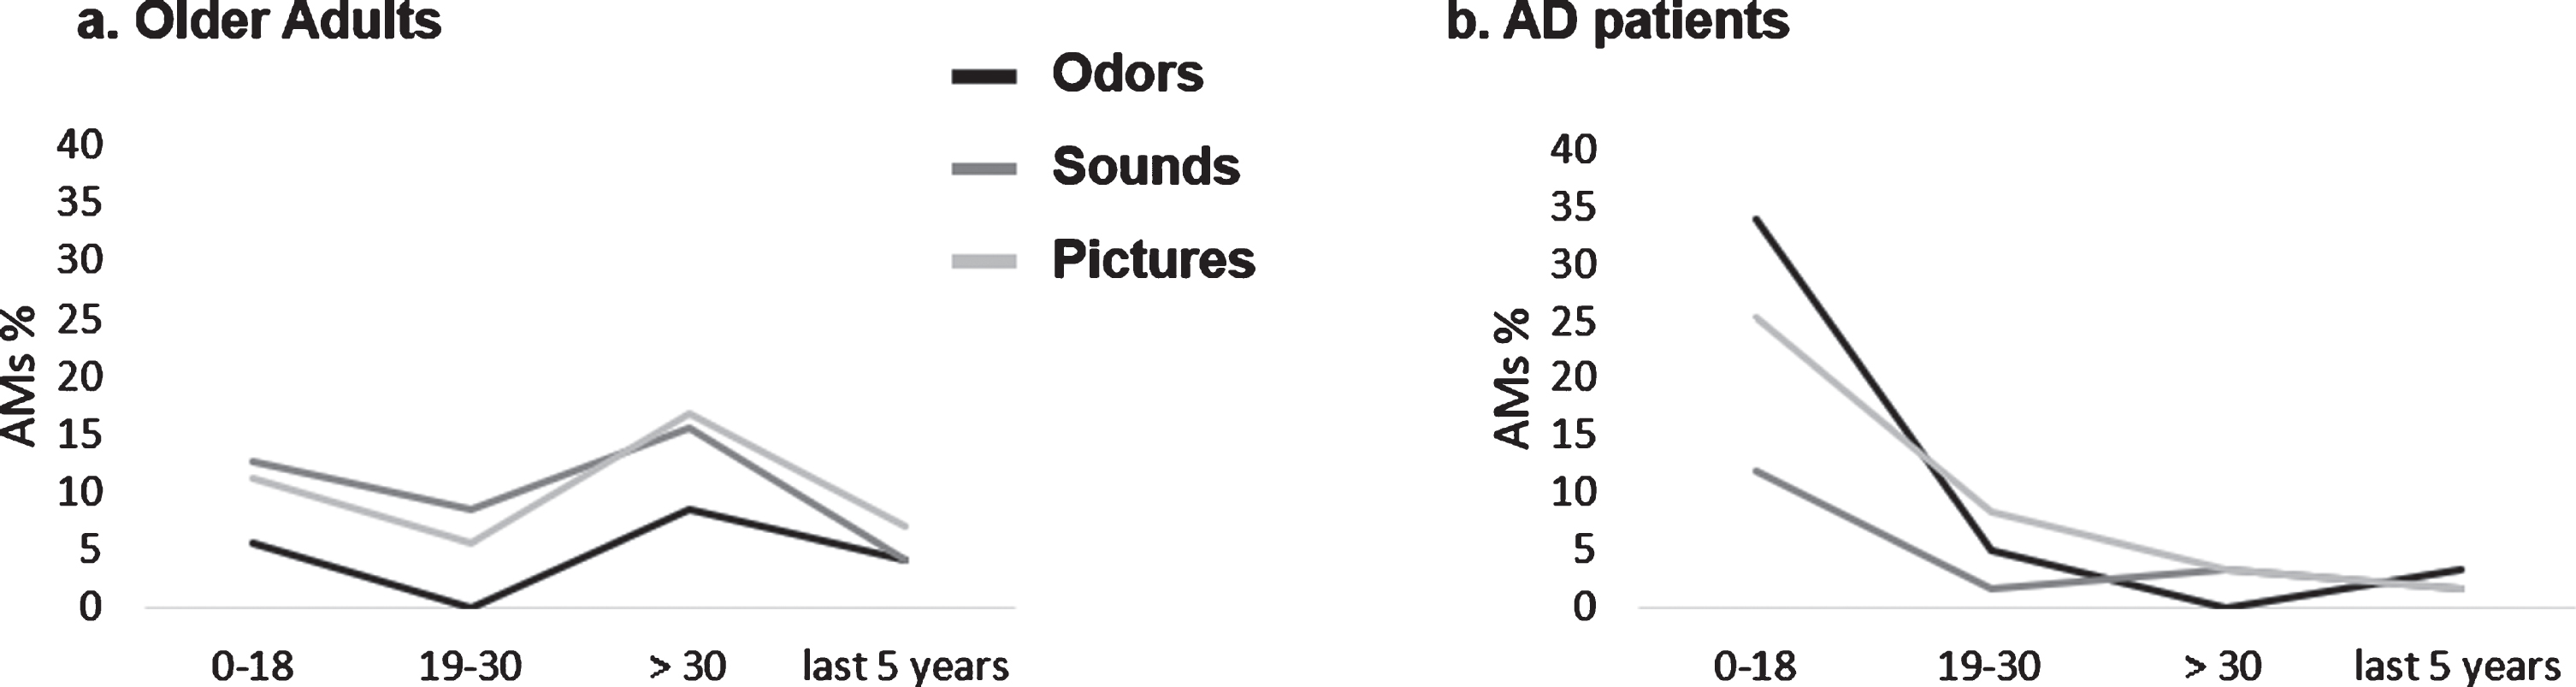 Graphic representation of AMs age distribution as a function of the type of sensory cueing for (a) older adults (OA) and (b) AD patients. Mean percentages are report.